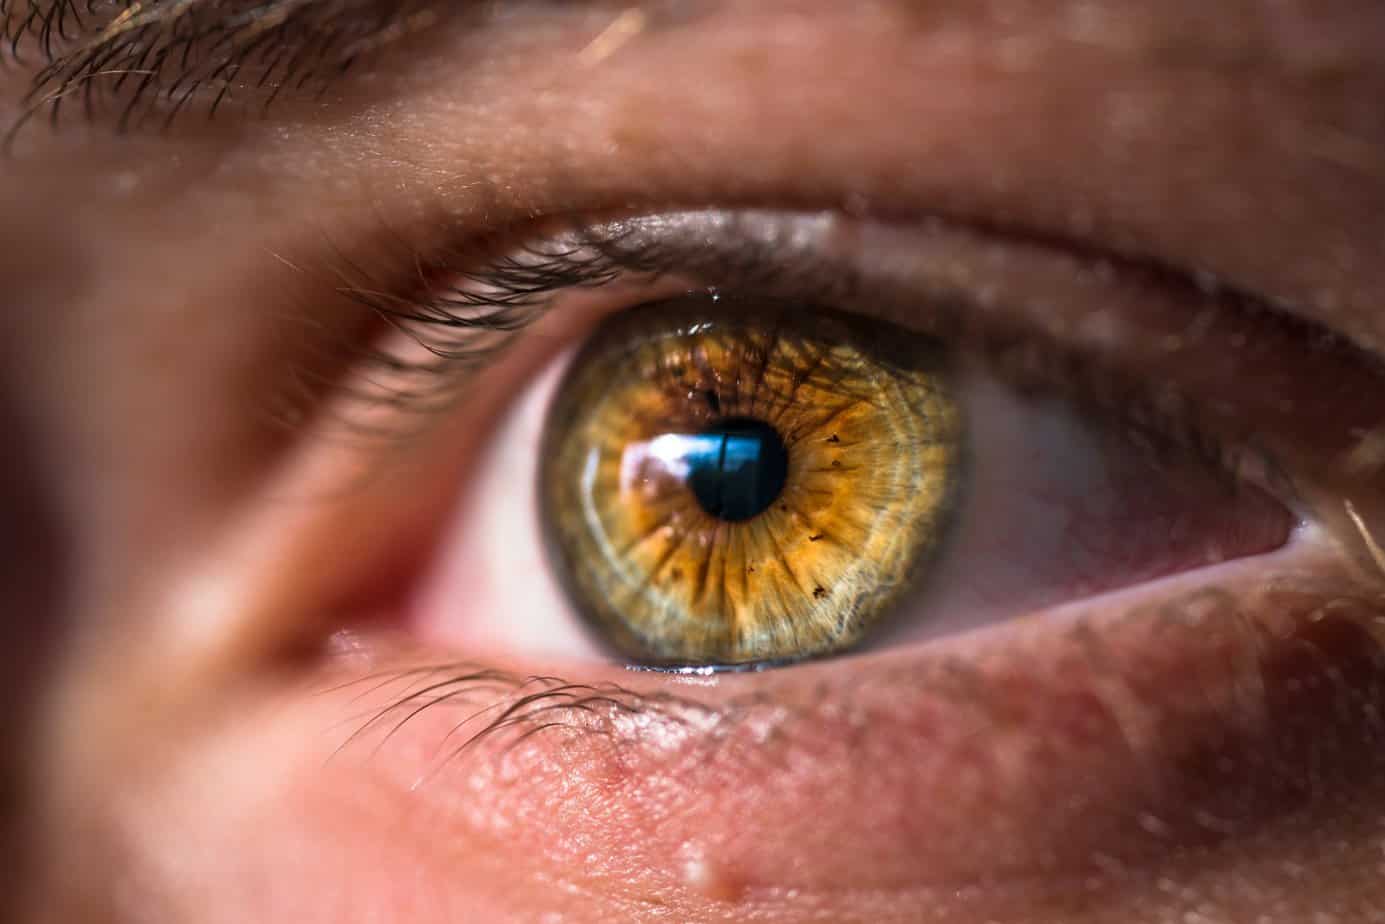 An eye looks forward with a slight reflection in it, at an EMDR appointment